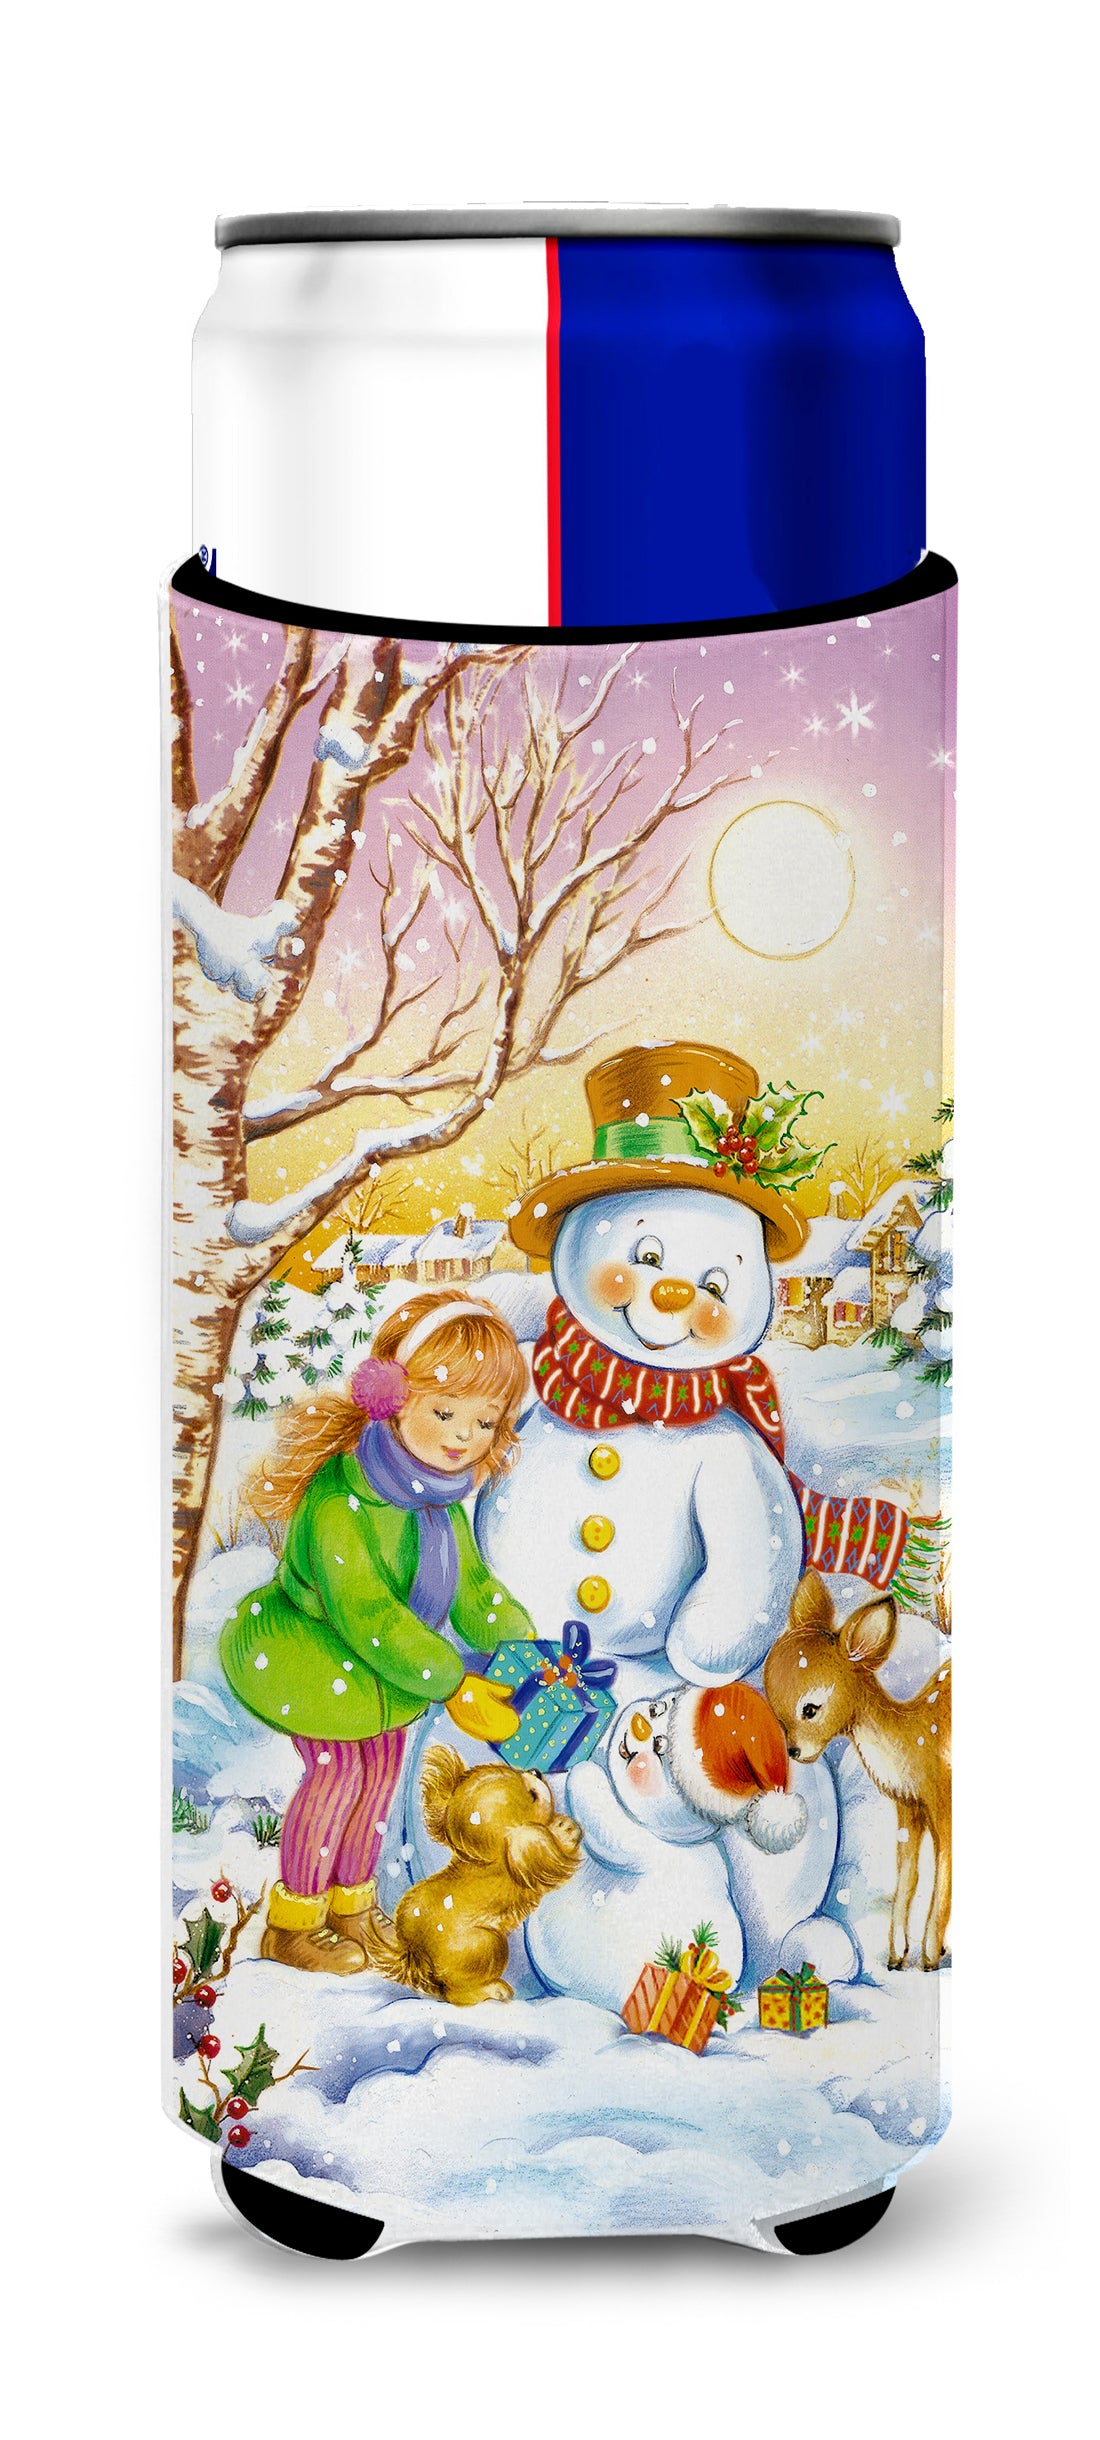 Girl and Animals with Snowman Ultra Beverage Insulators for slim cans APH3544MUK